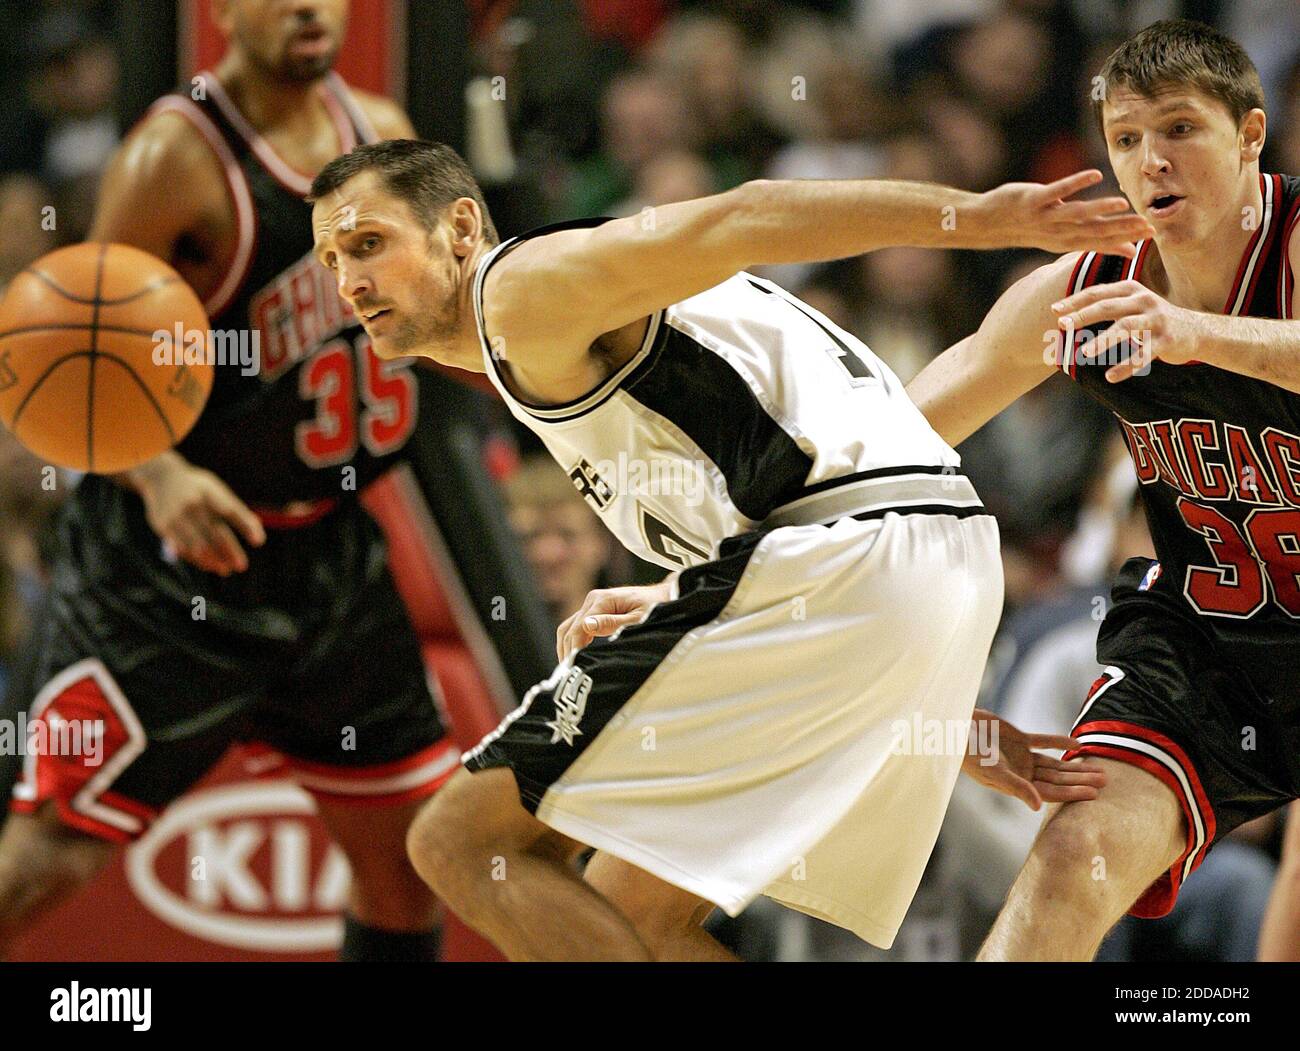 NO FILM, NO VIDEO, NO TV, NO DOCUMENTARY - Chicago Bulls' Viktor Khryapa and San Antonio Spurs' Brent Barry vie for a loose ball at the United Center in Chicago, Illinois, Monday, January 15, 2007. The Bulls defeated the Spurs 99-87. Photo by Charles Cherney/Chicago Tribune/MCT/ABACAPRESS.COM Stock Photo